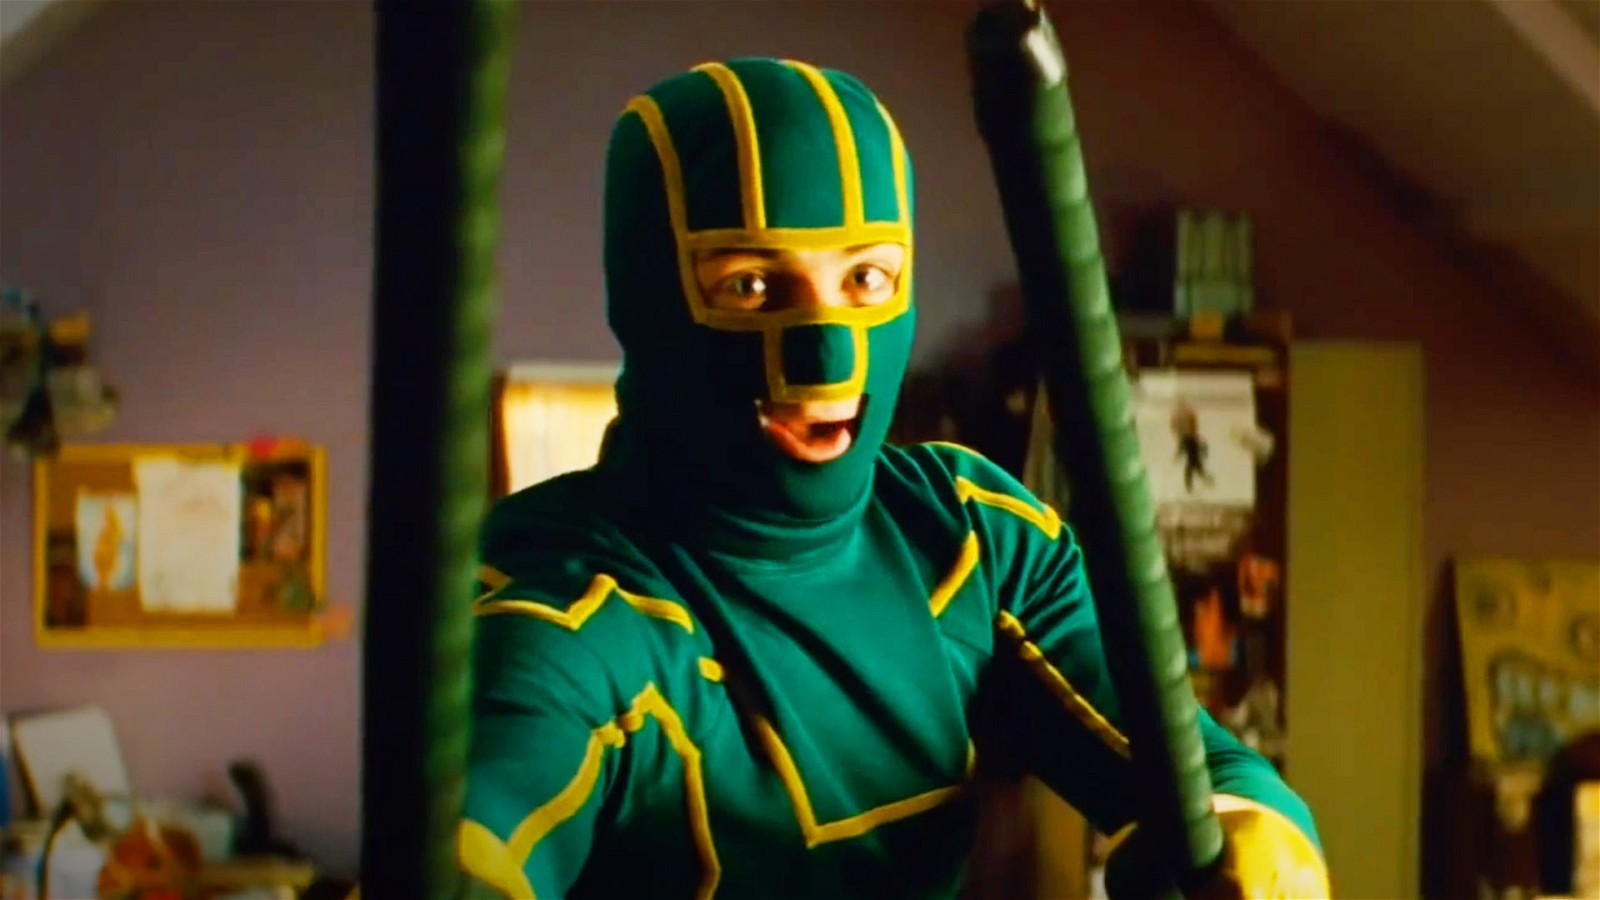 Matthew Vaughn is confident that his new film will have the same impact as Kick-Ass